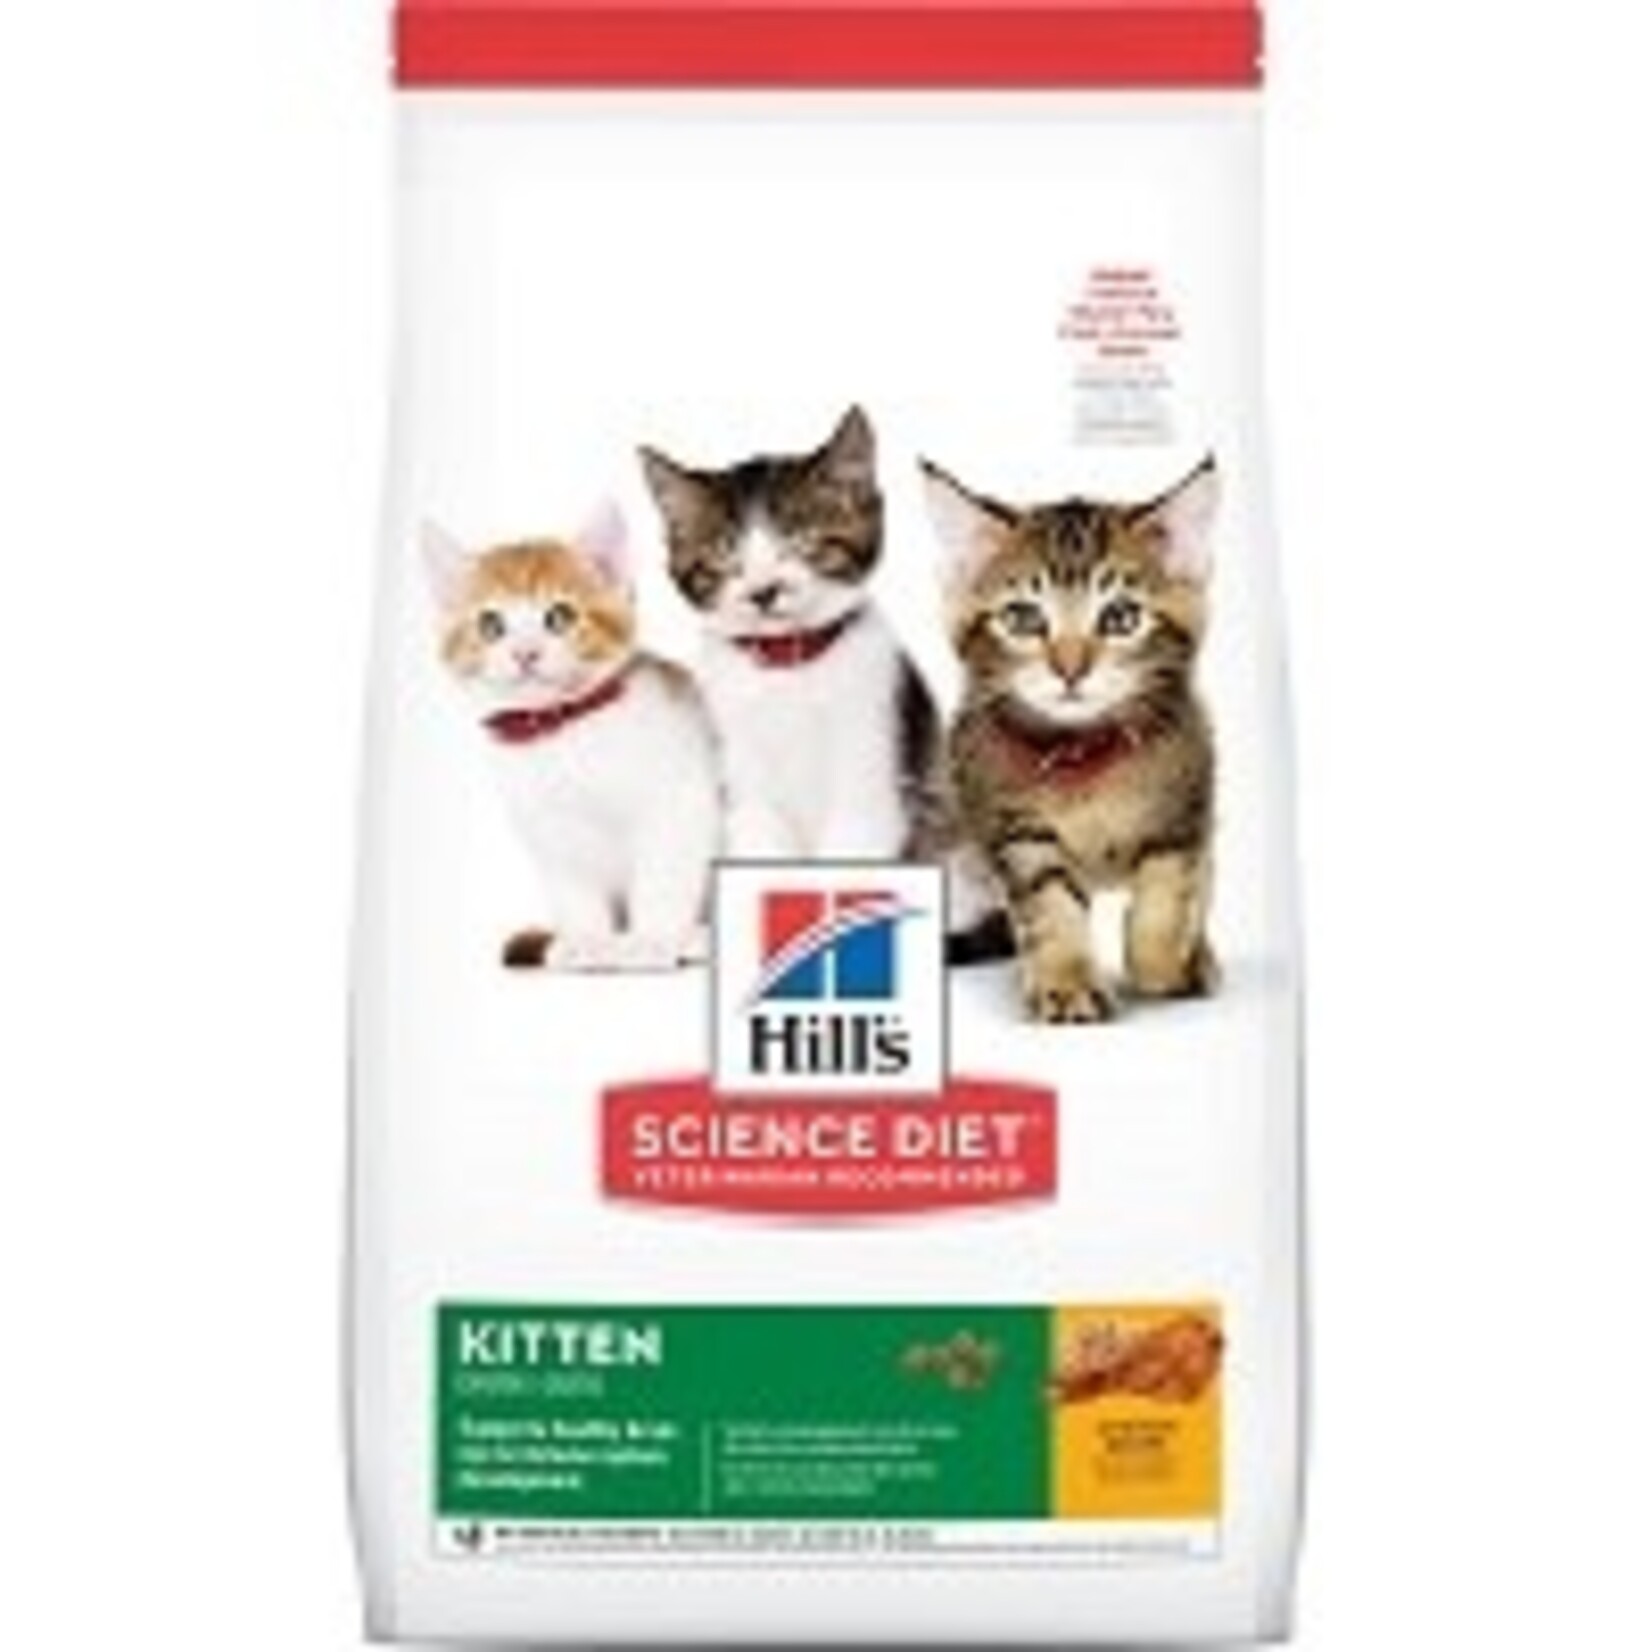 SCIENCE DIET SCIENCE DIET CHATON 3.5LBS